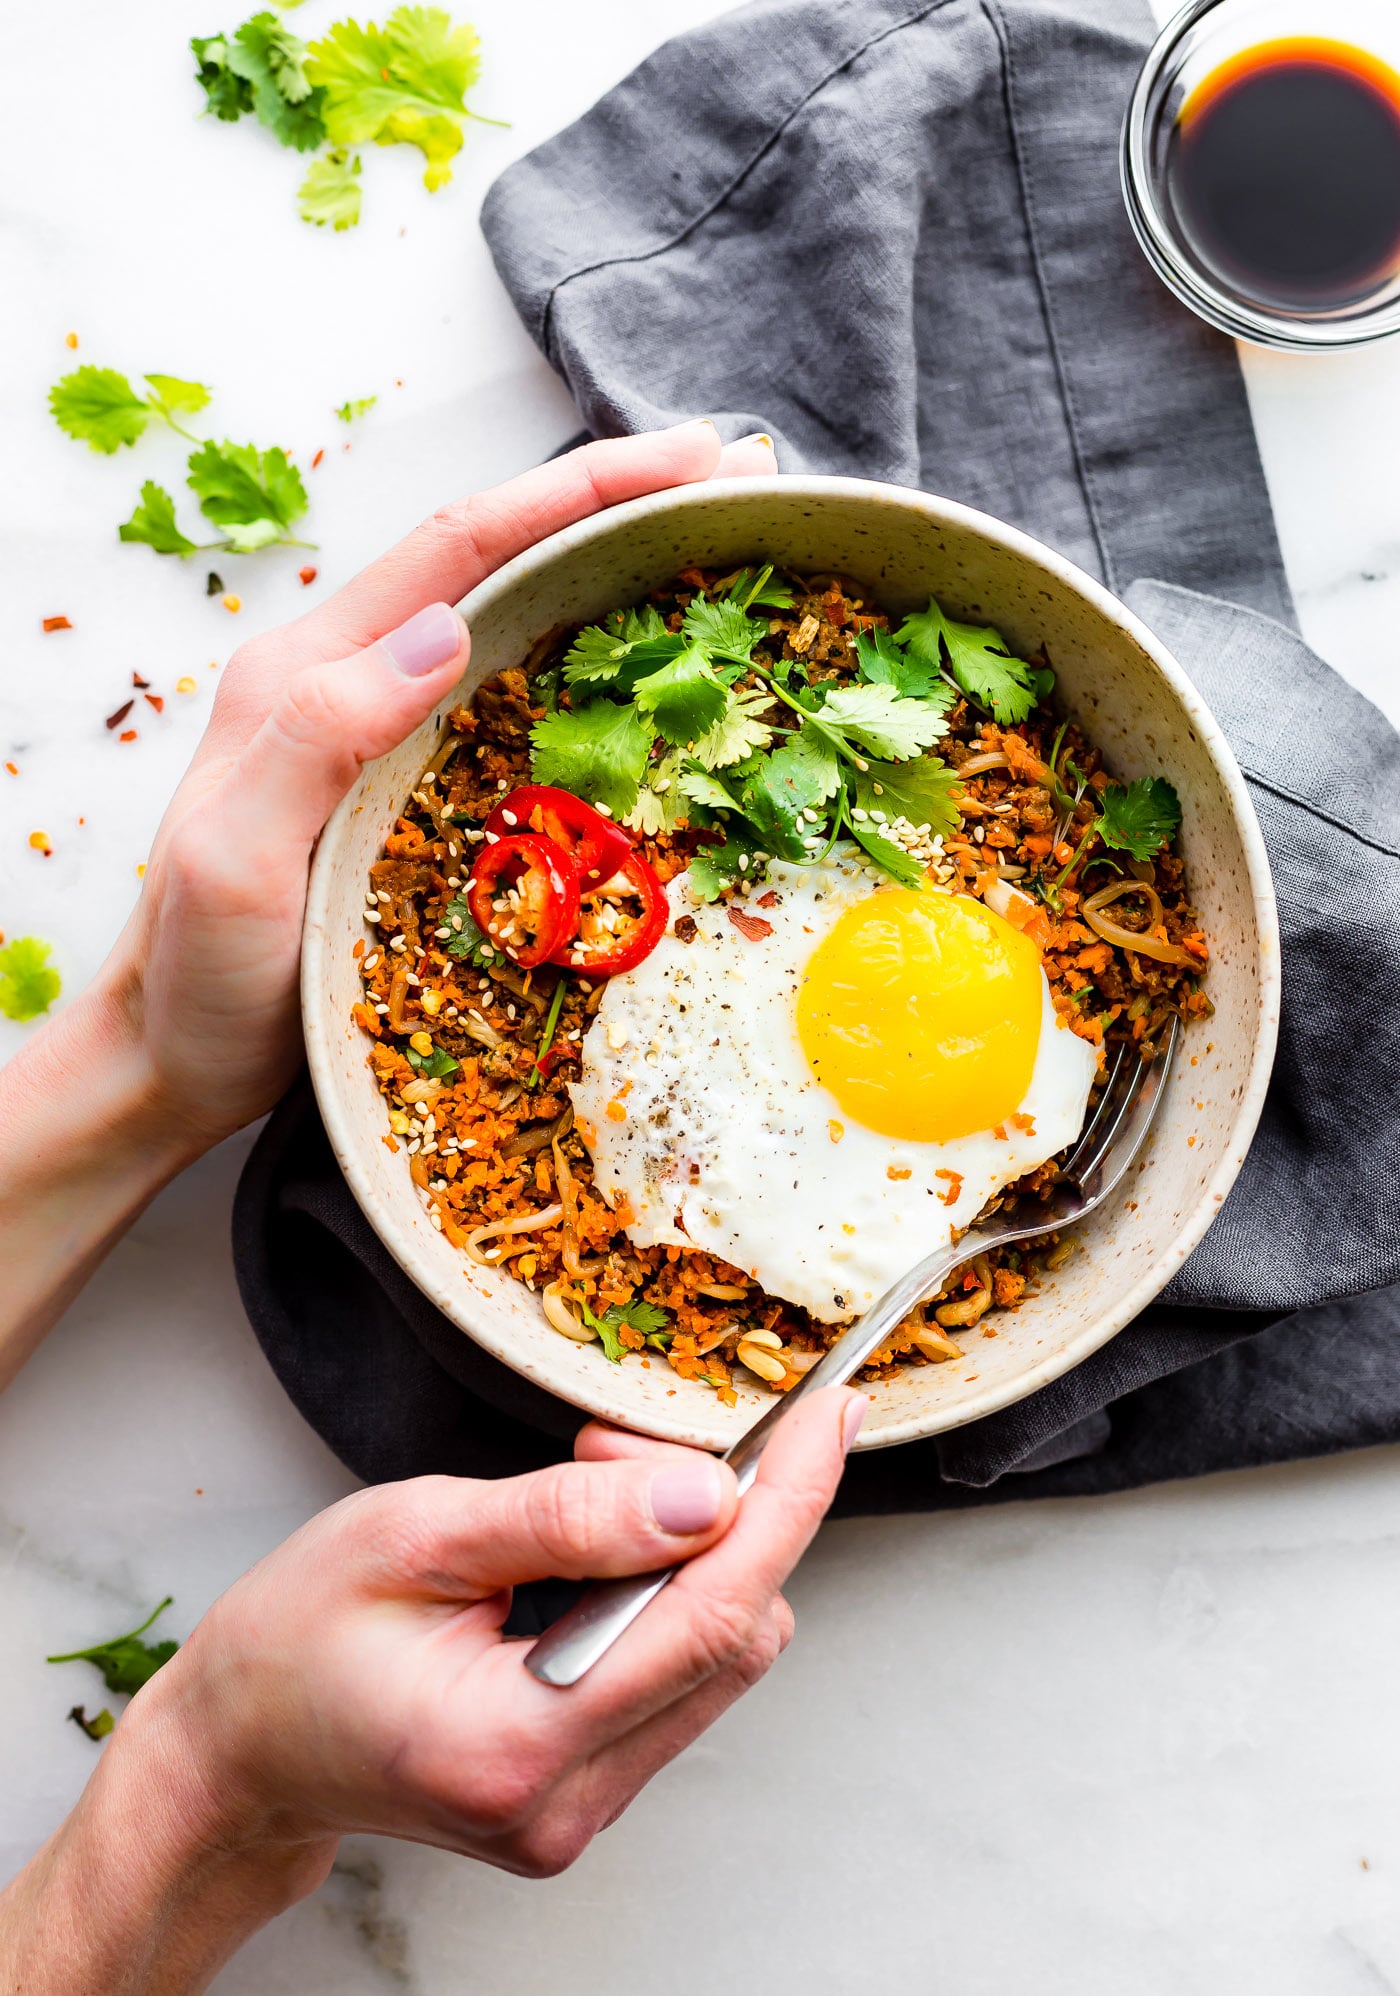 This Quick Carrot Rice Breakfast Nasi Goreng is the perfect way to utilize those leftover veggies! A stir fried "carrot rice" mixed with egg and sausage. A Indonesian style breakfast Nasi Goreng that's paleo friendly, super flavorful, and packed full of protein and veggies! Cook and serve all in 30 minutes!